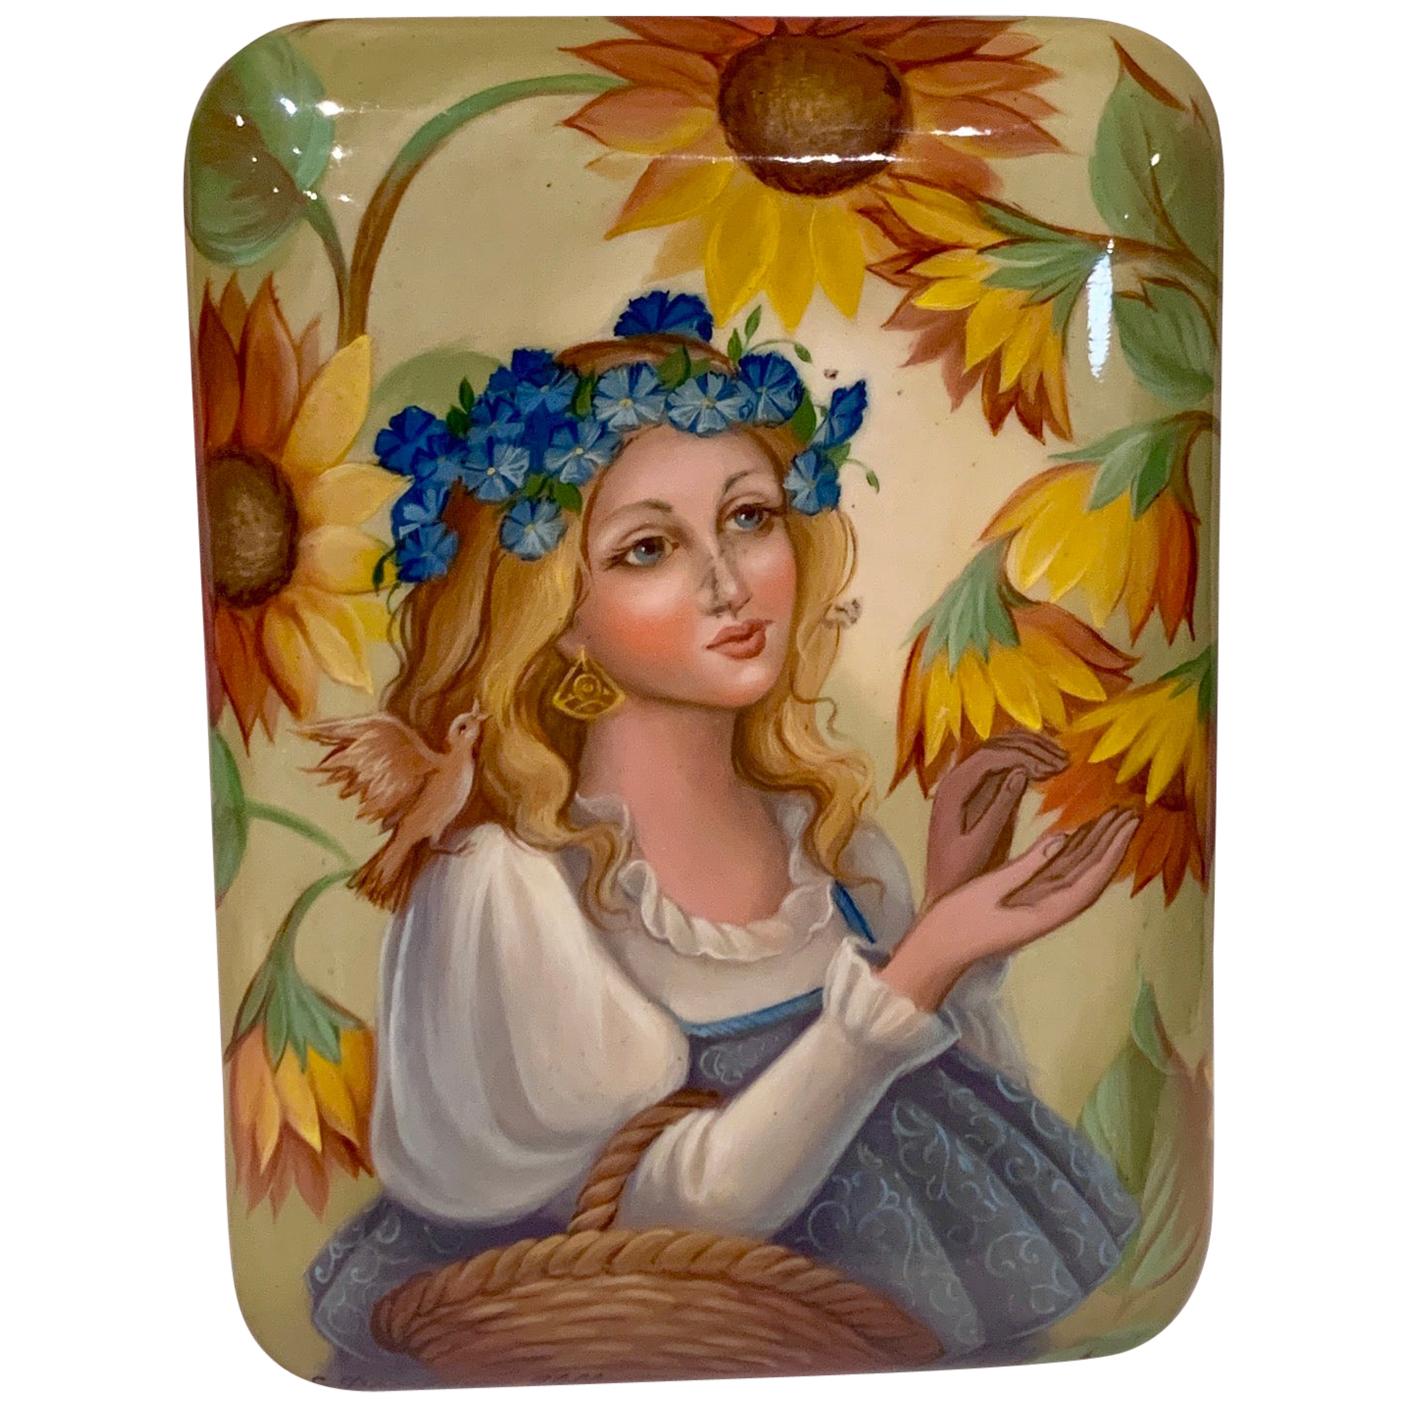 Russian Lacquered Small Decorative Box 'Girl with Sunflowers' by Fedoskino 